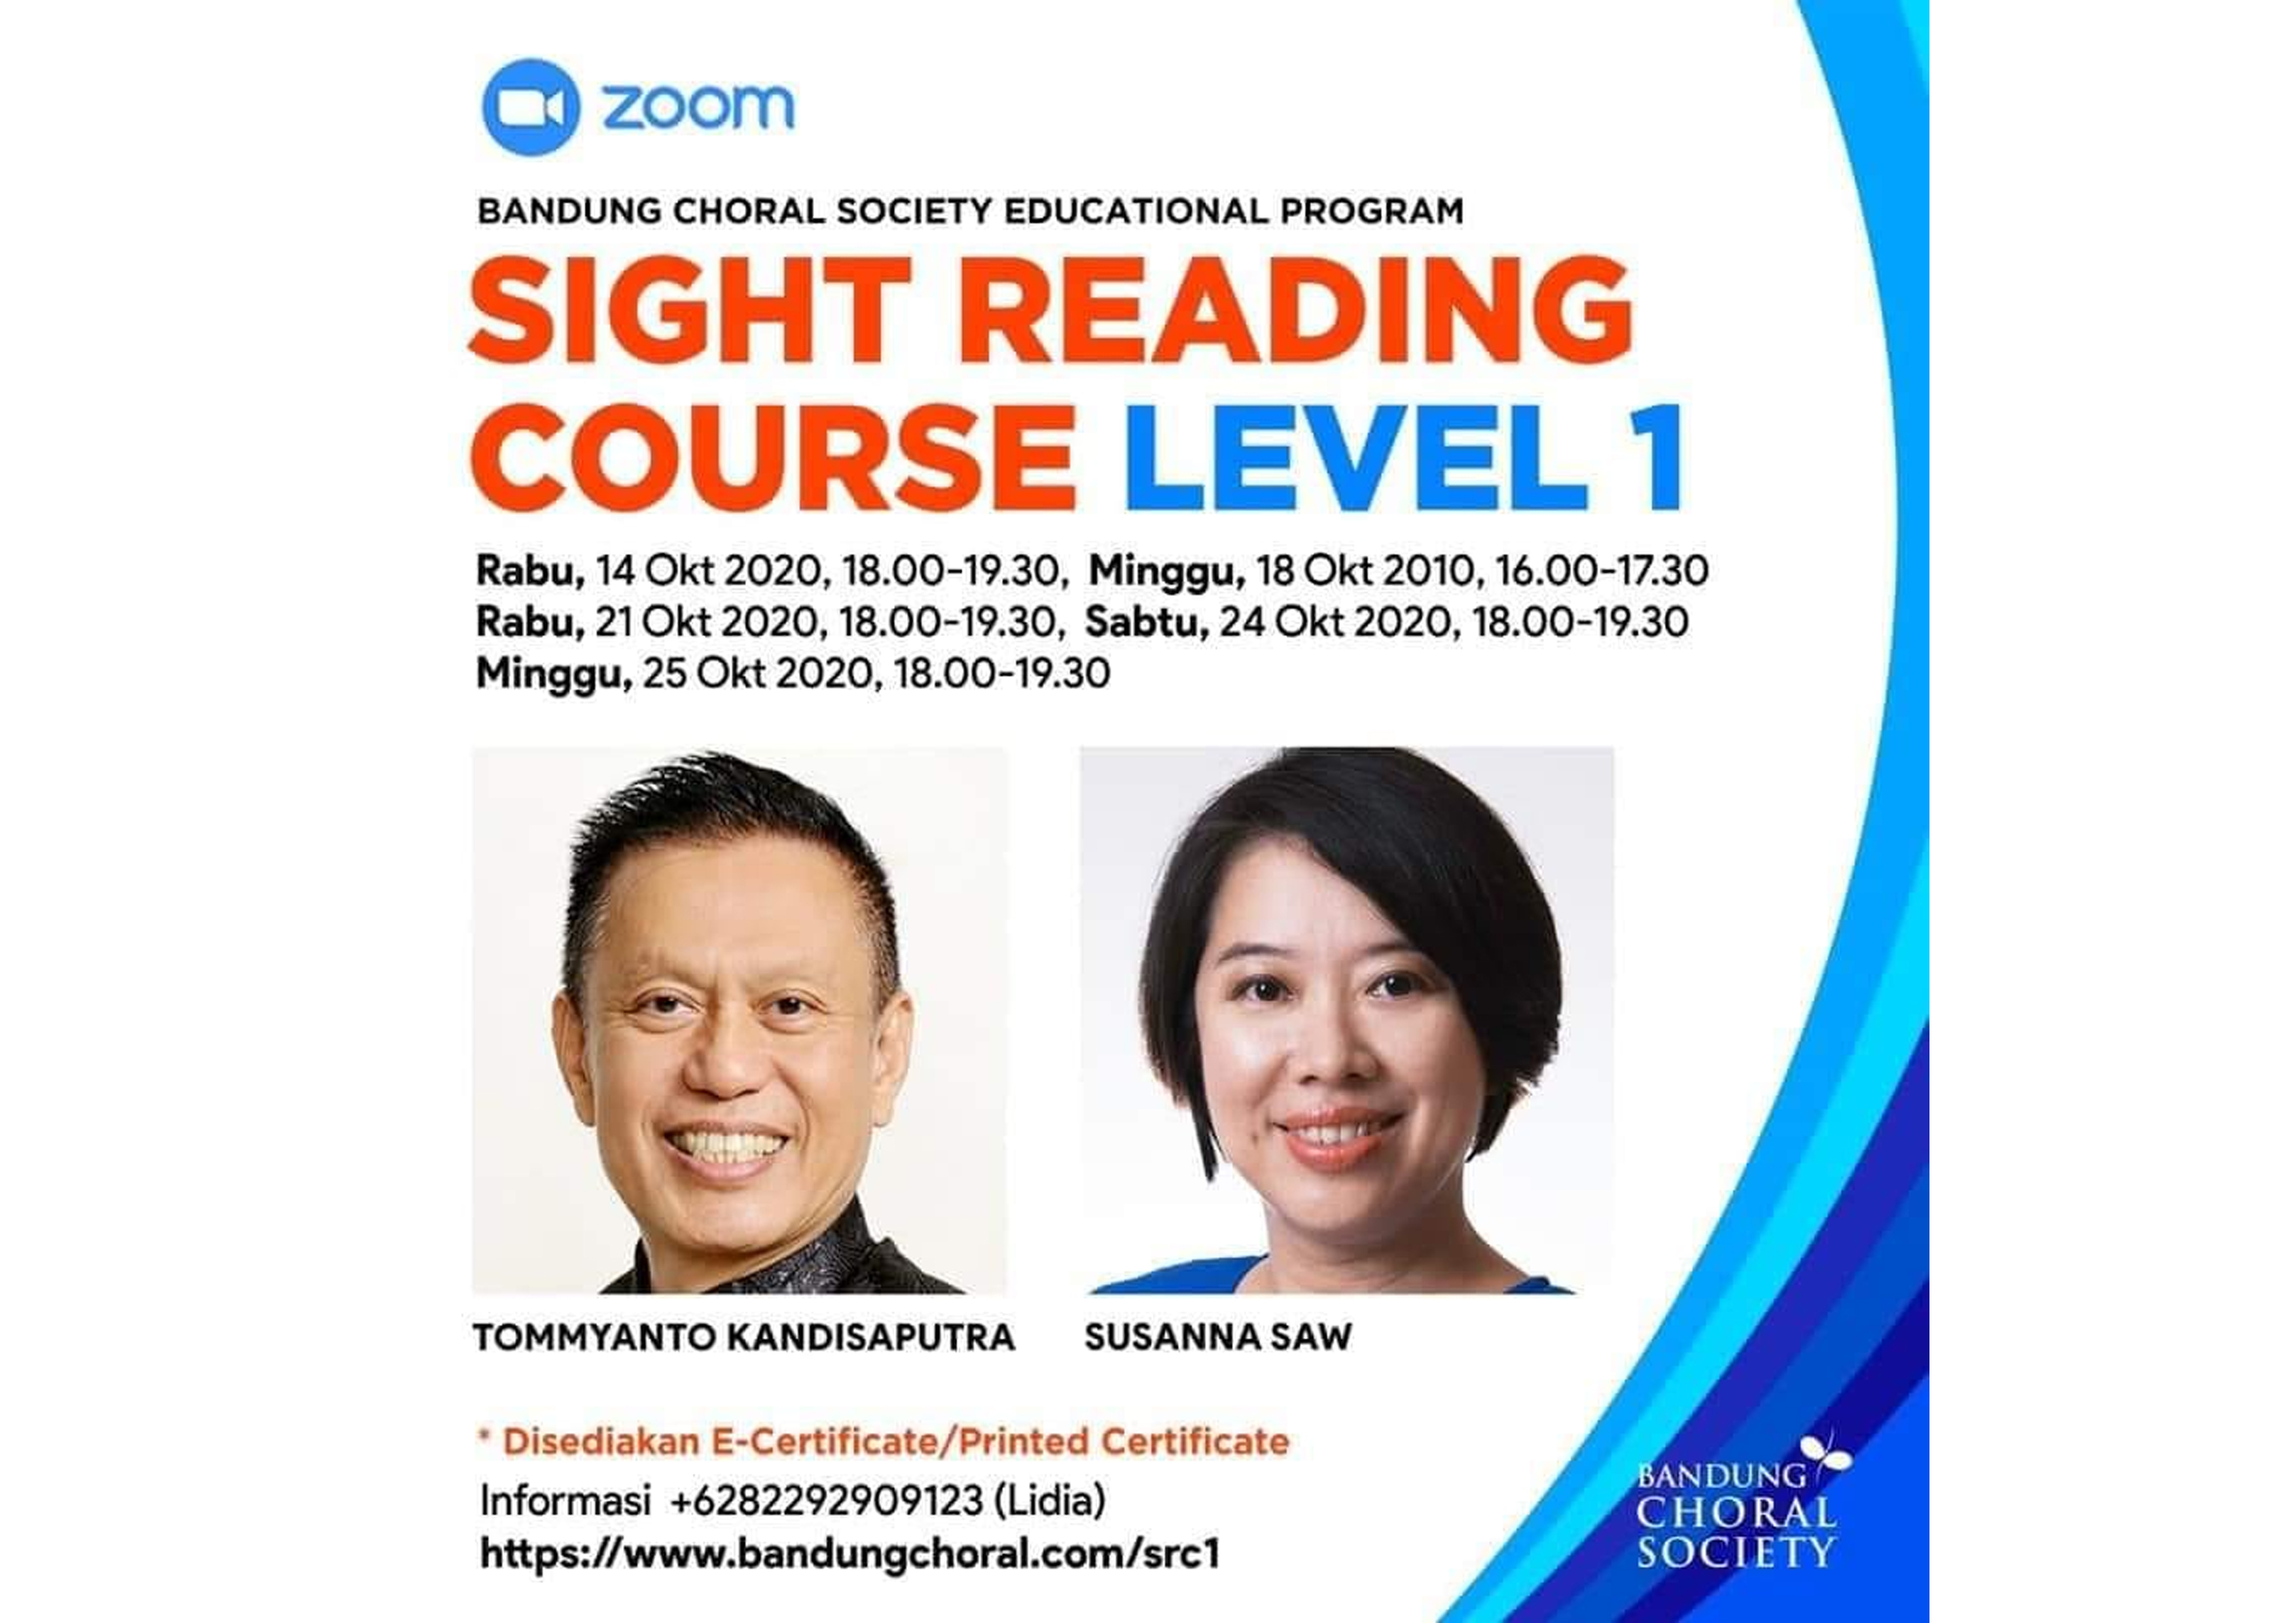 SIGHT READING COURSE, LEVEL 1